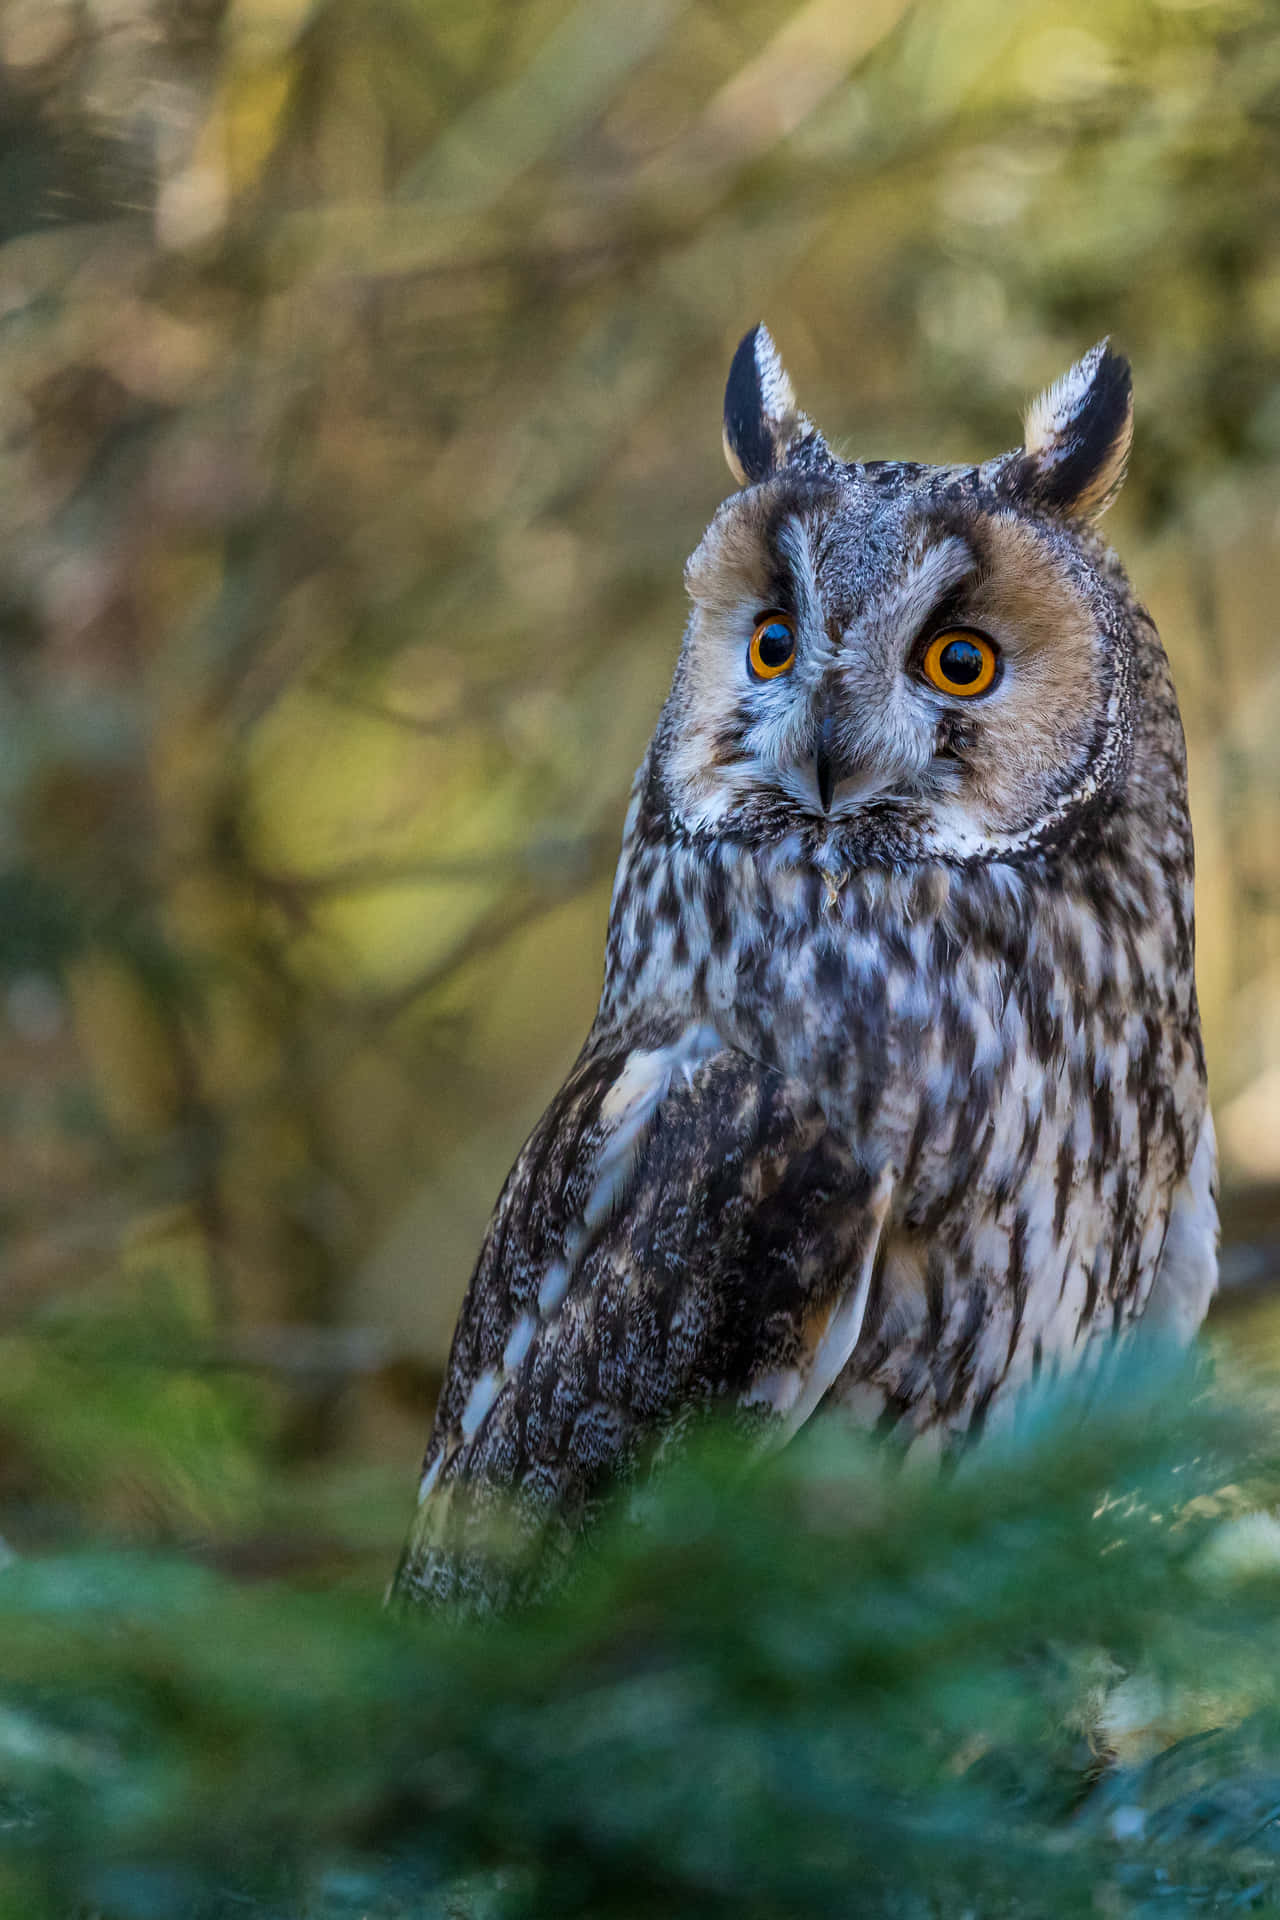 Sweet and mysterious, this cute owl looks right at home amongst nature